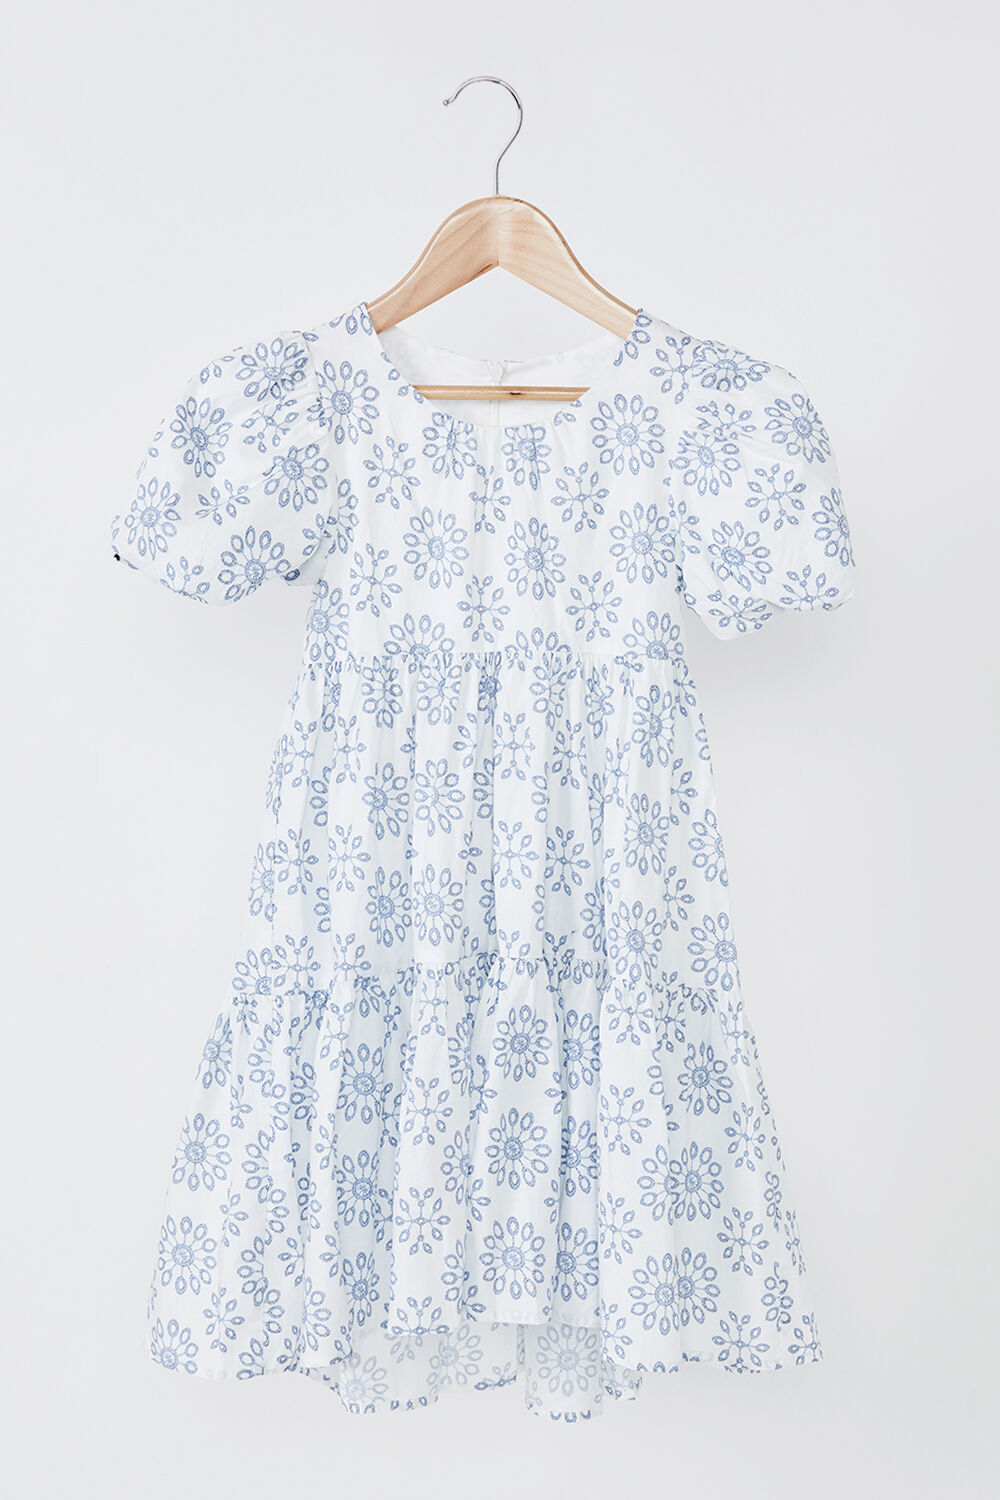 GIRLS AMELIE TIERED DRESS in colour WINTER SKY